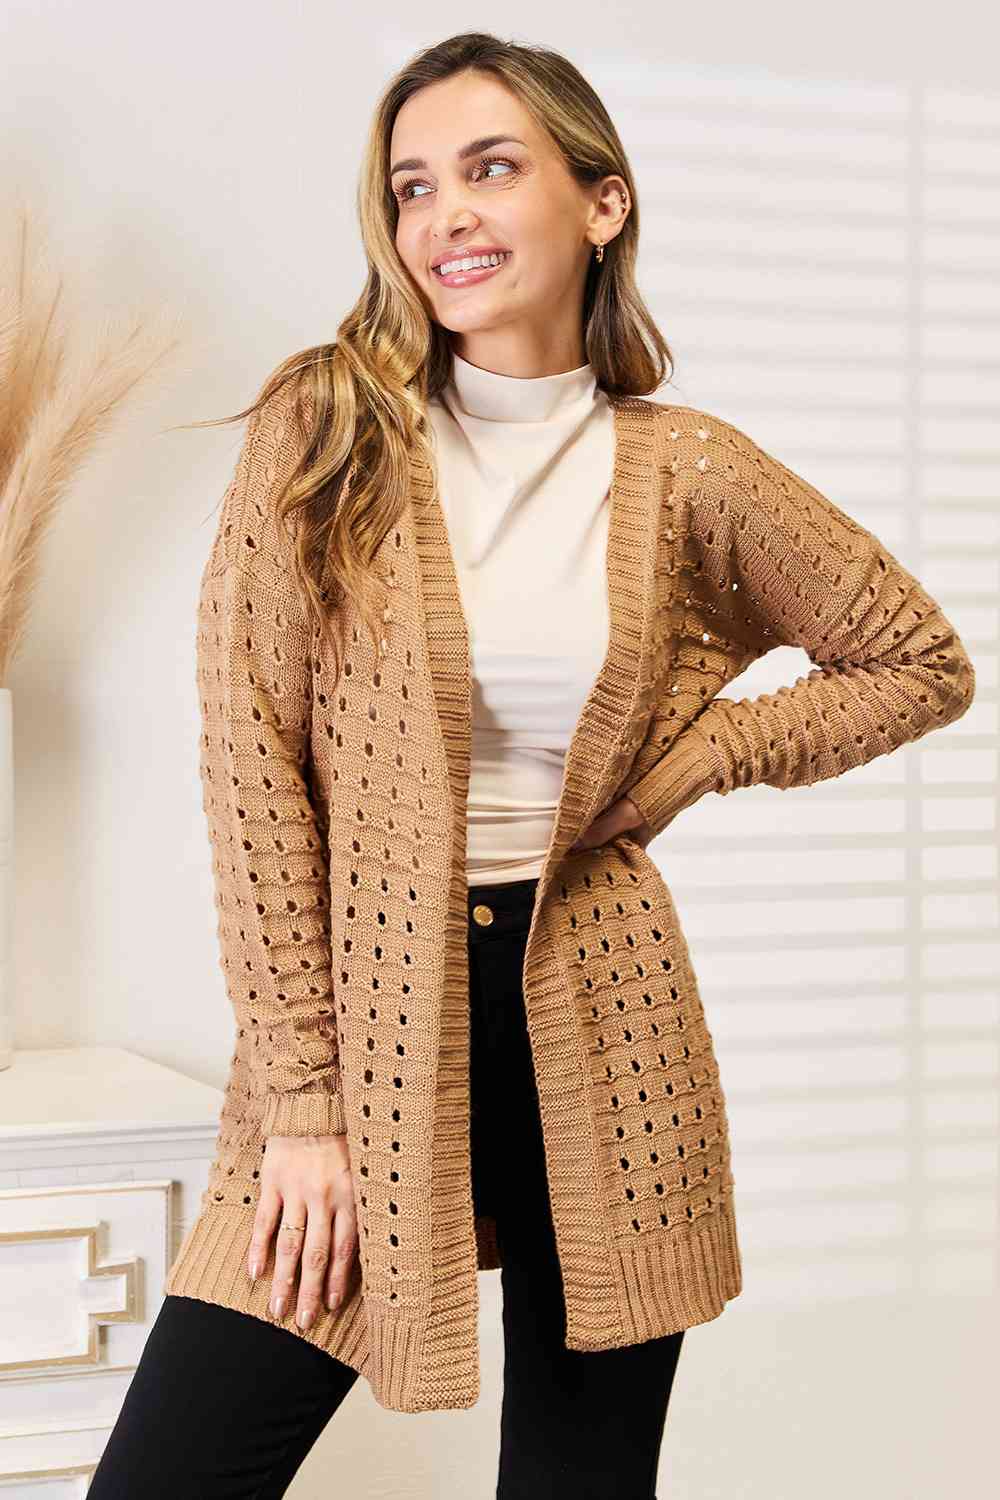 Woven Right Openwork Horizontal Ribbing Open Front Cardigan